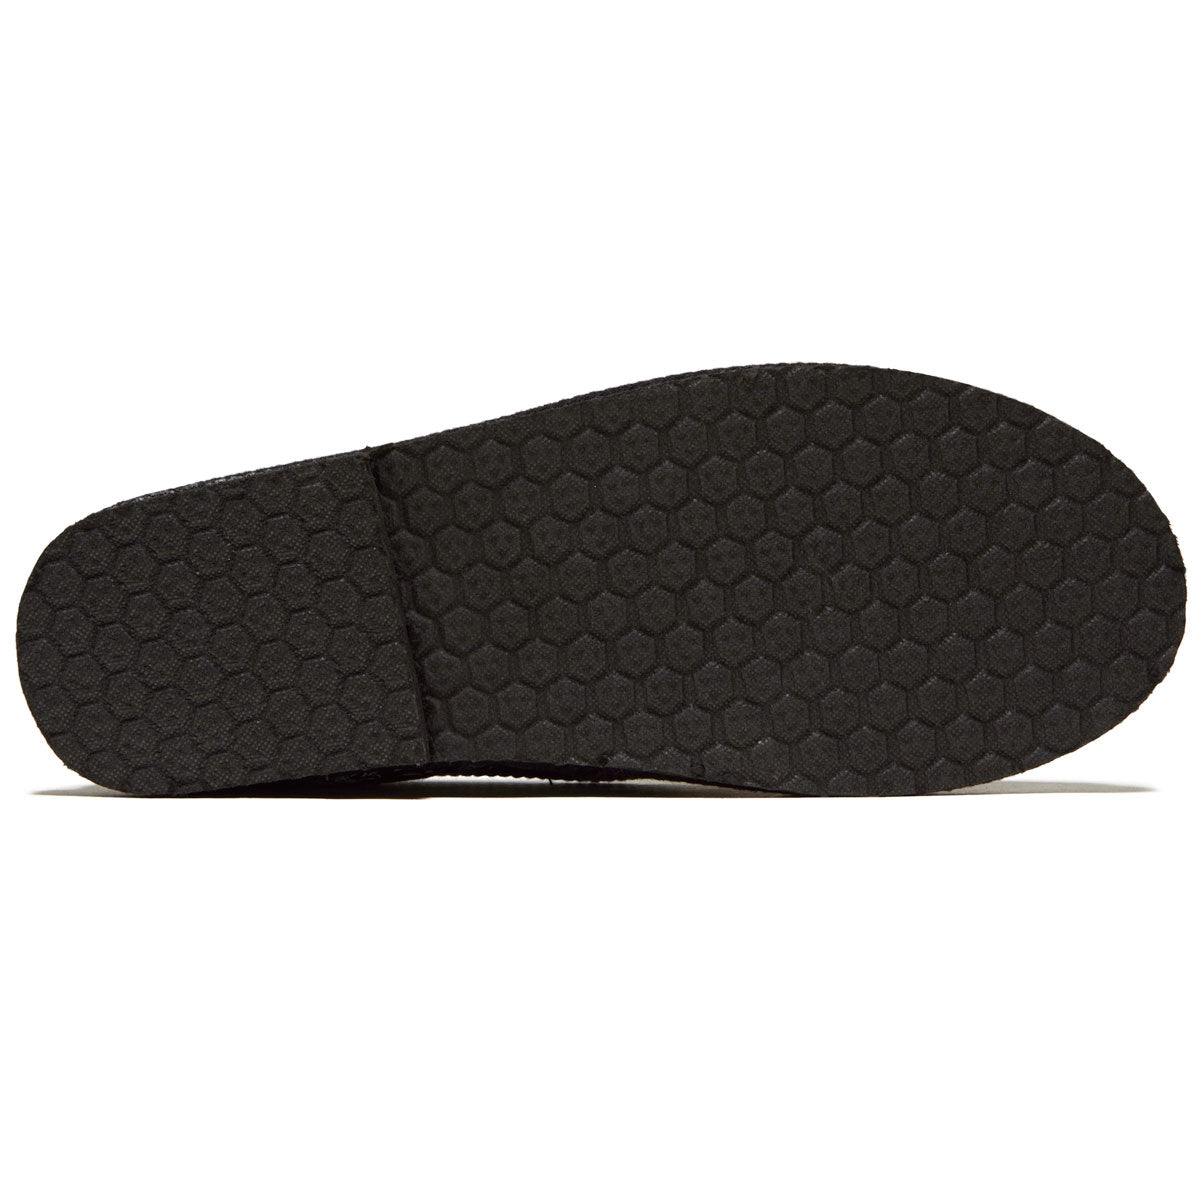 DVS Francisco Slippers - Black/White Printed Canvas image 4